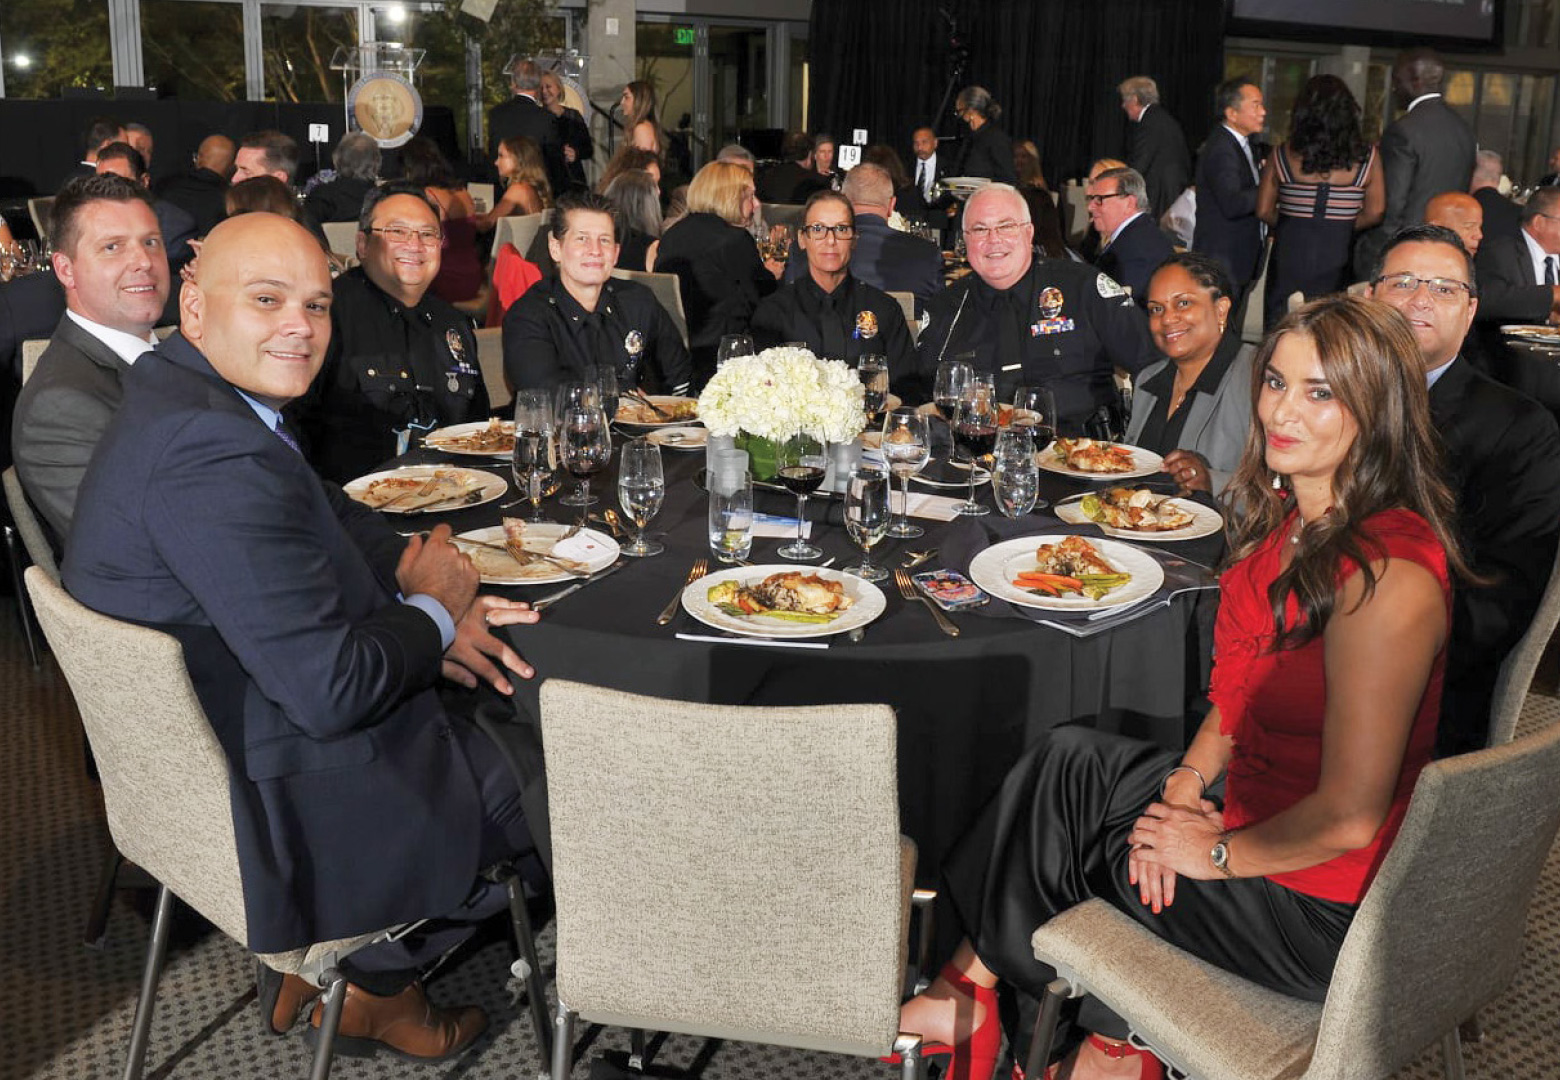 skirball-reopens-reserve-officer-of-the-year-twice-a-citizen-gala-28